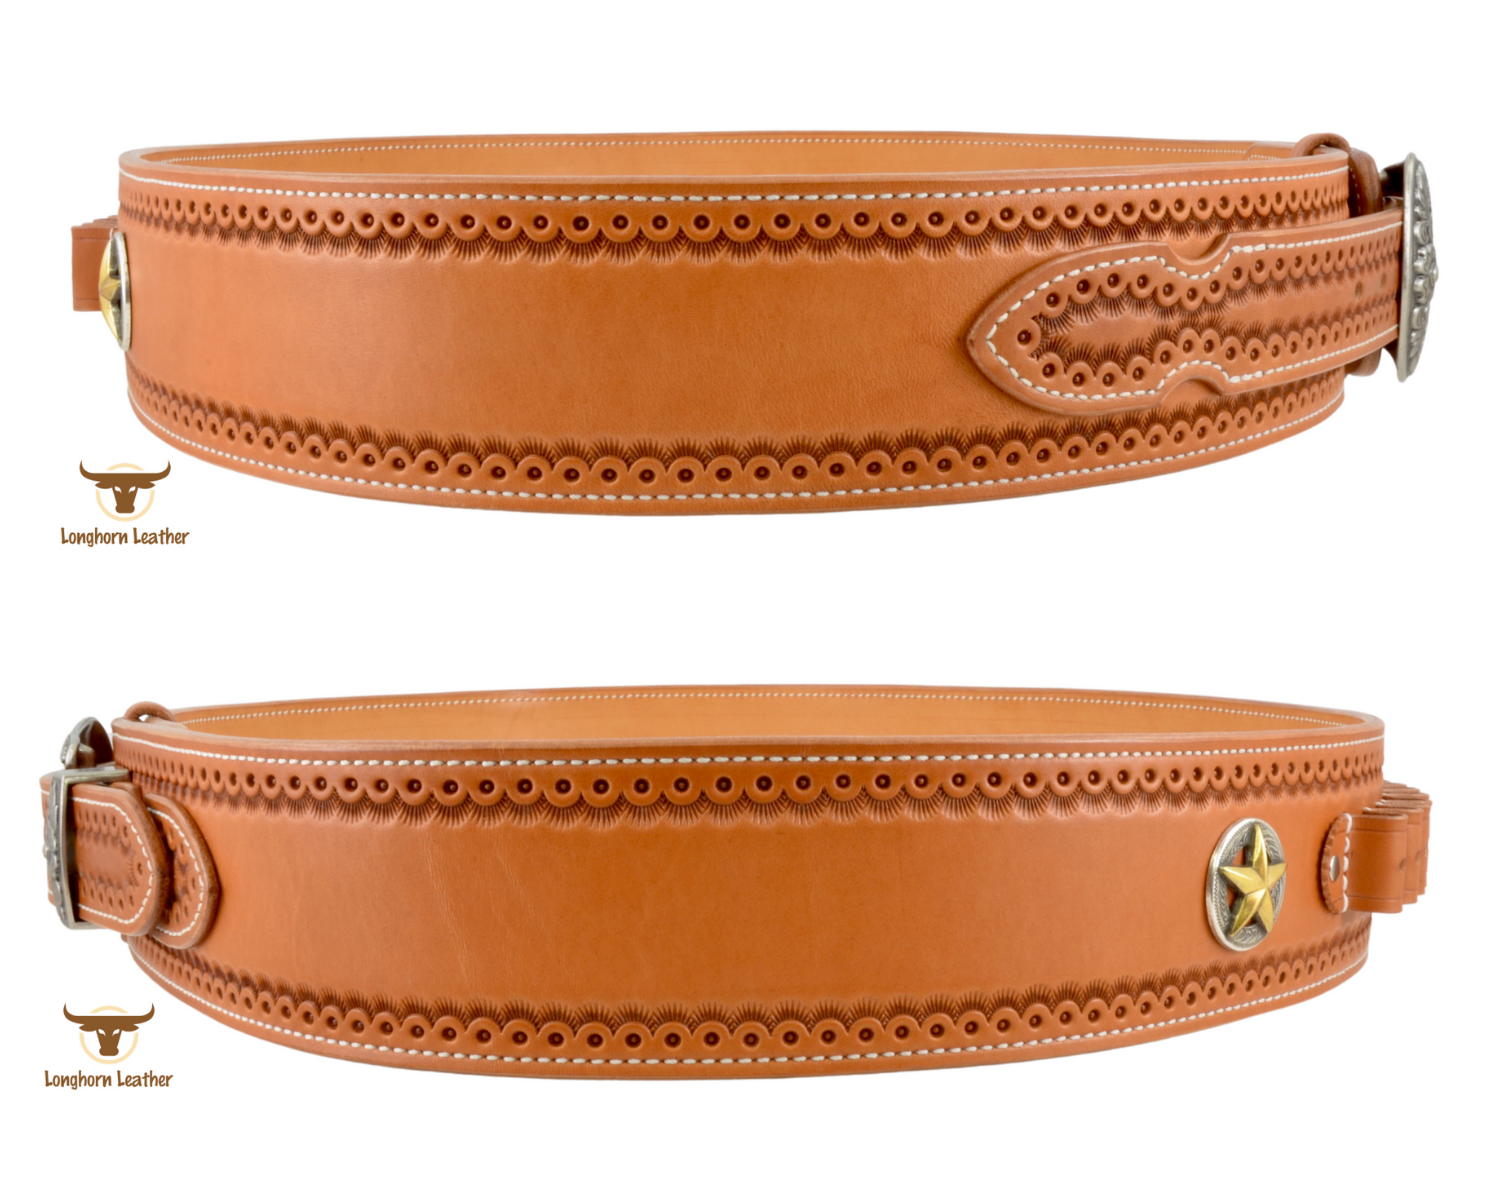 Custom leather cartridge belt featuring the "Cimarron" design.  Individually handcrafted at Longhorn Leather AZ.